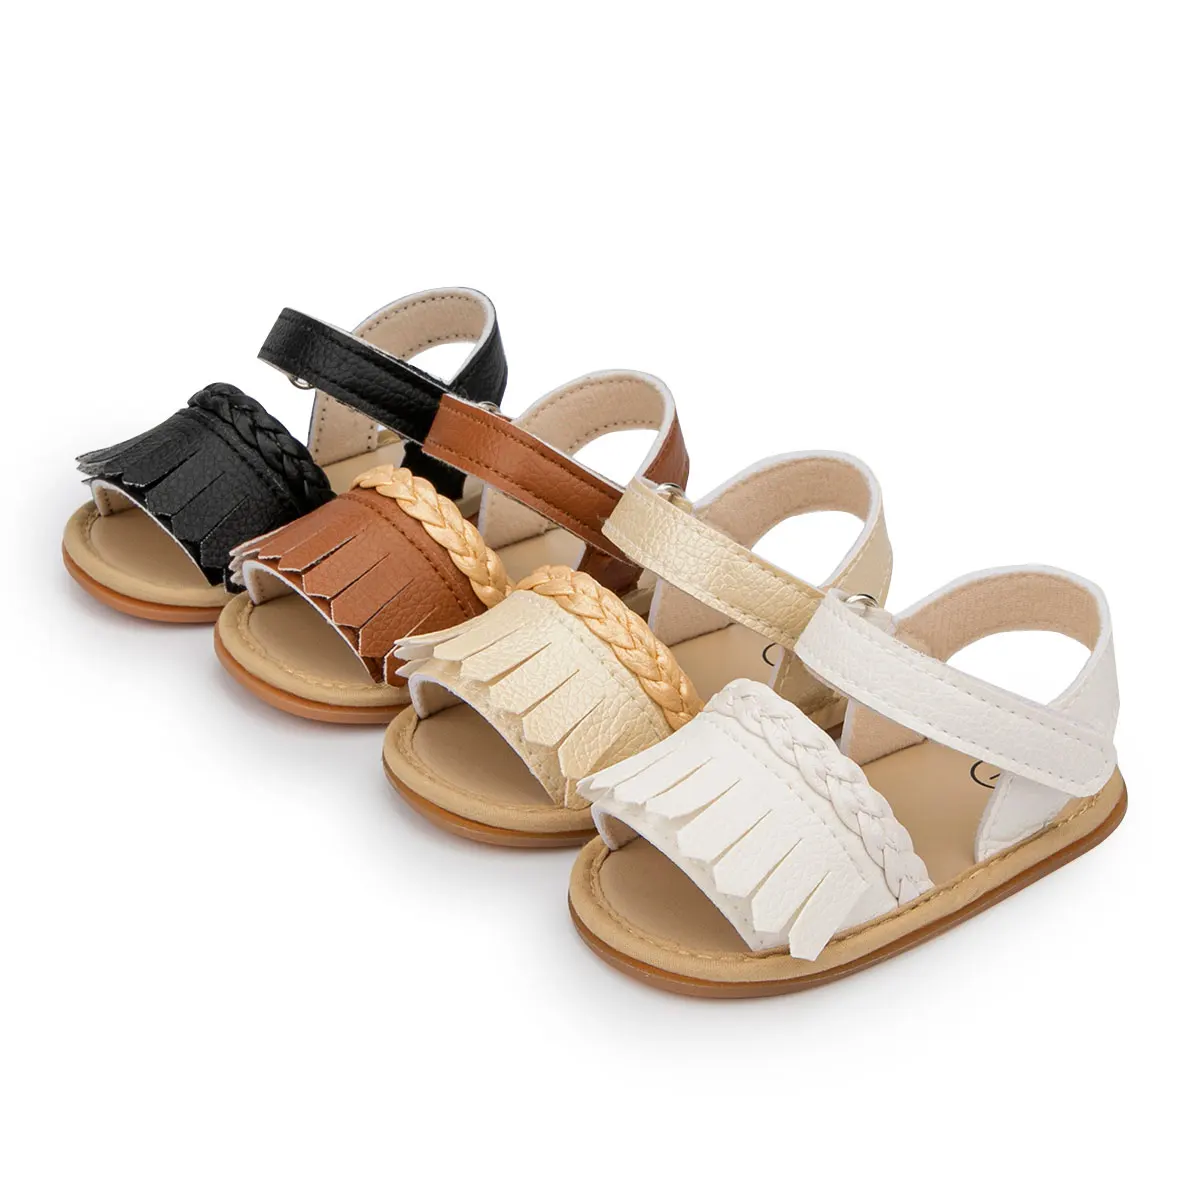 New Arrival Outdoor Baby Shoes Unisex Boy And Girl PU Leather Rubber Soft Sole Baby Girl Sandals